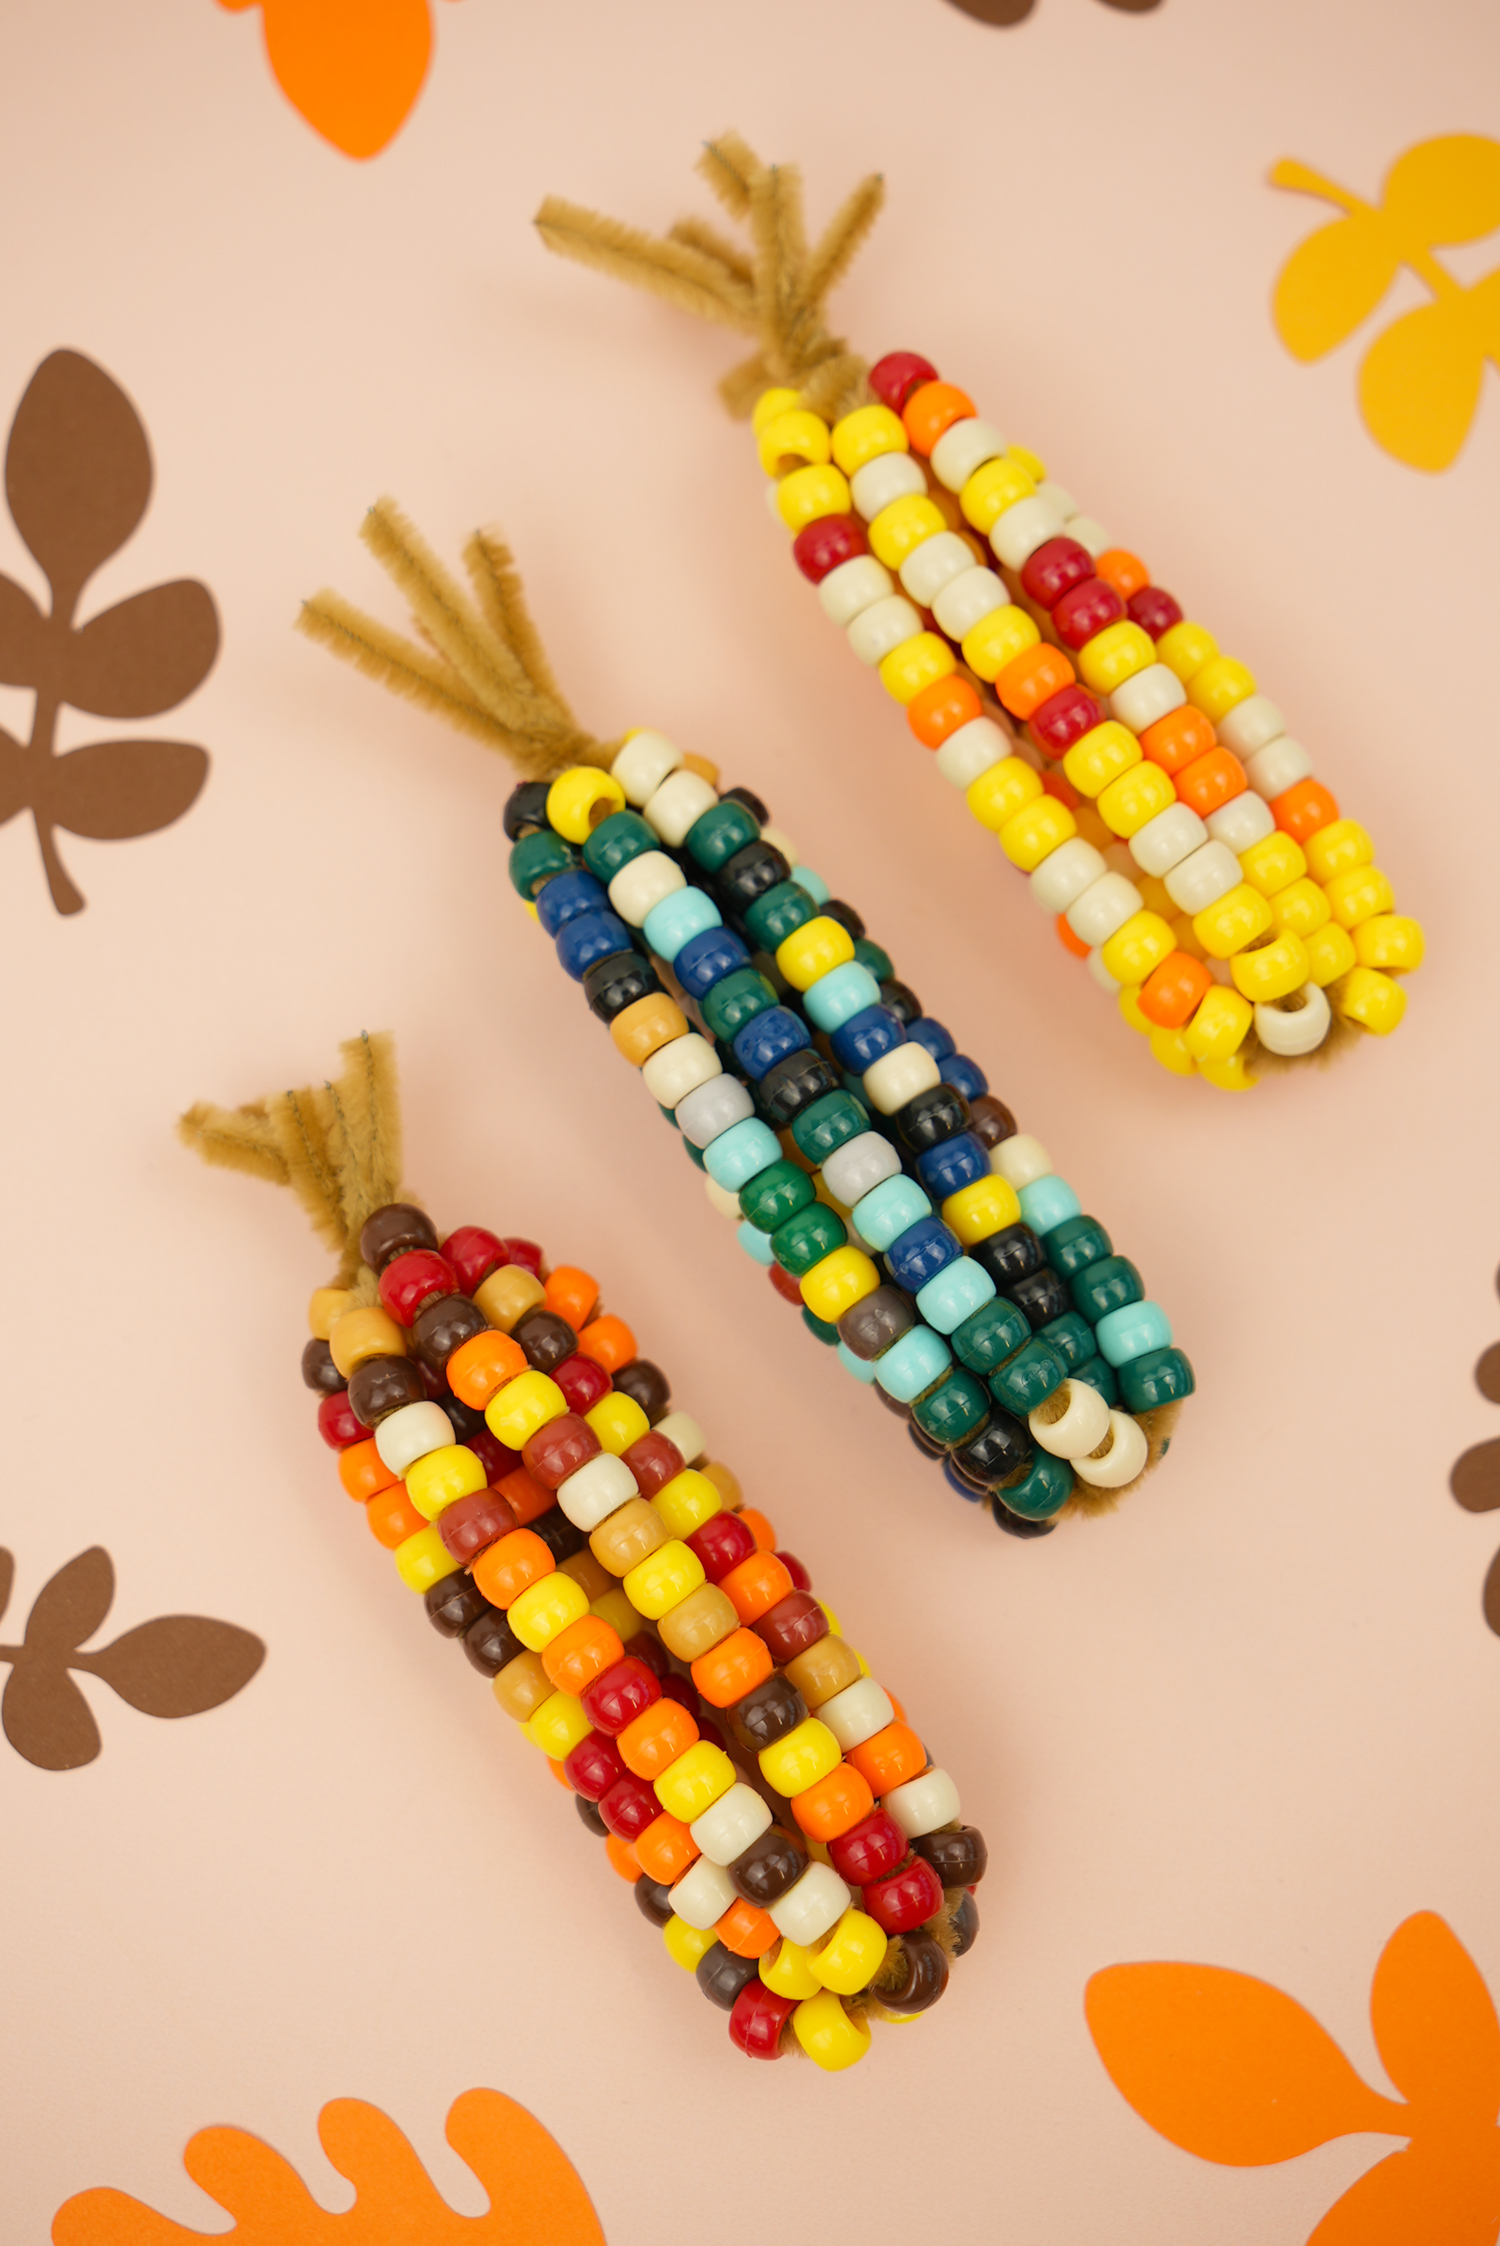 Fall Crafts for Kids: Beaded Corn Craft